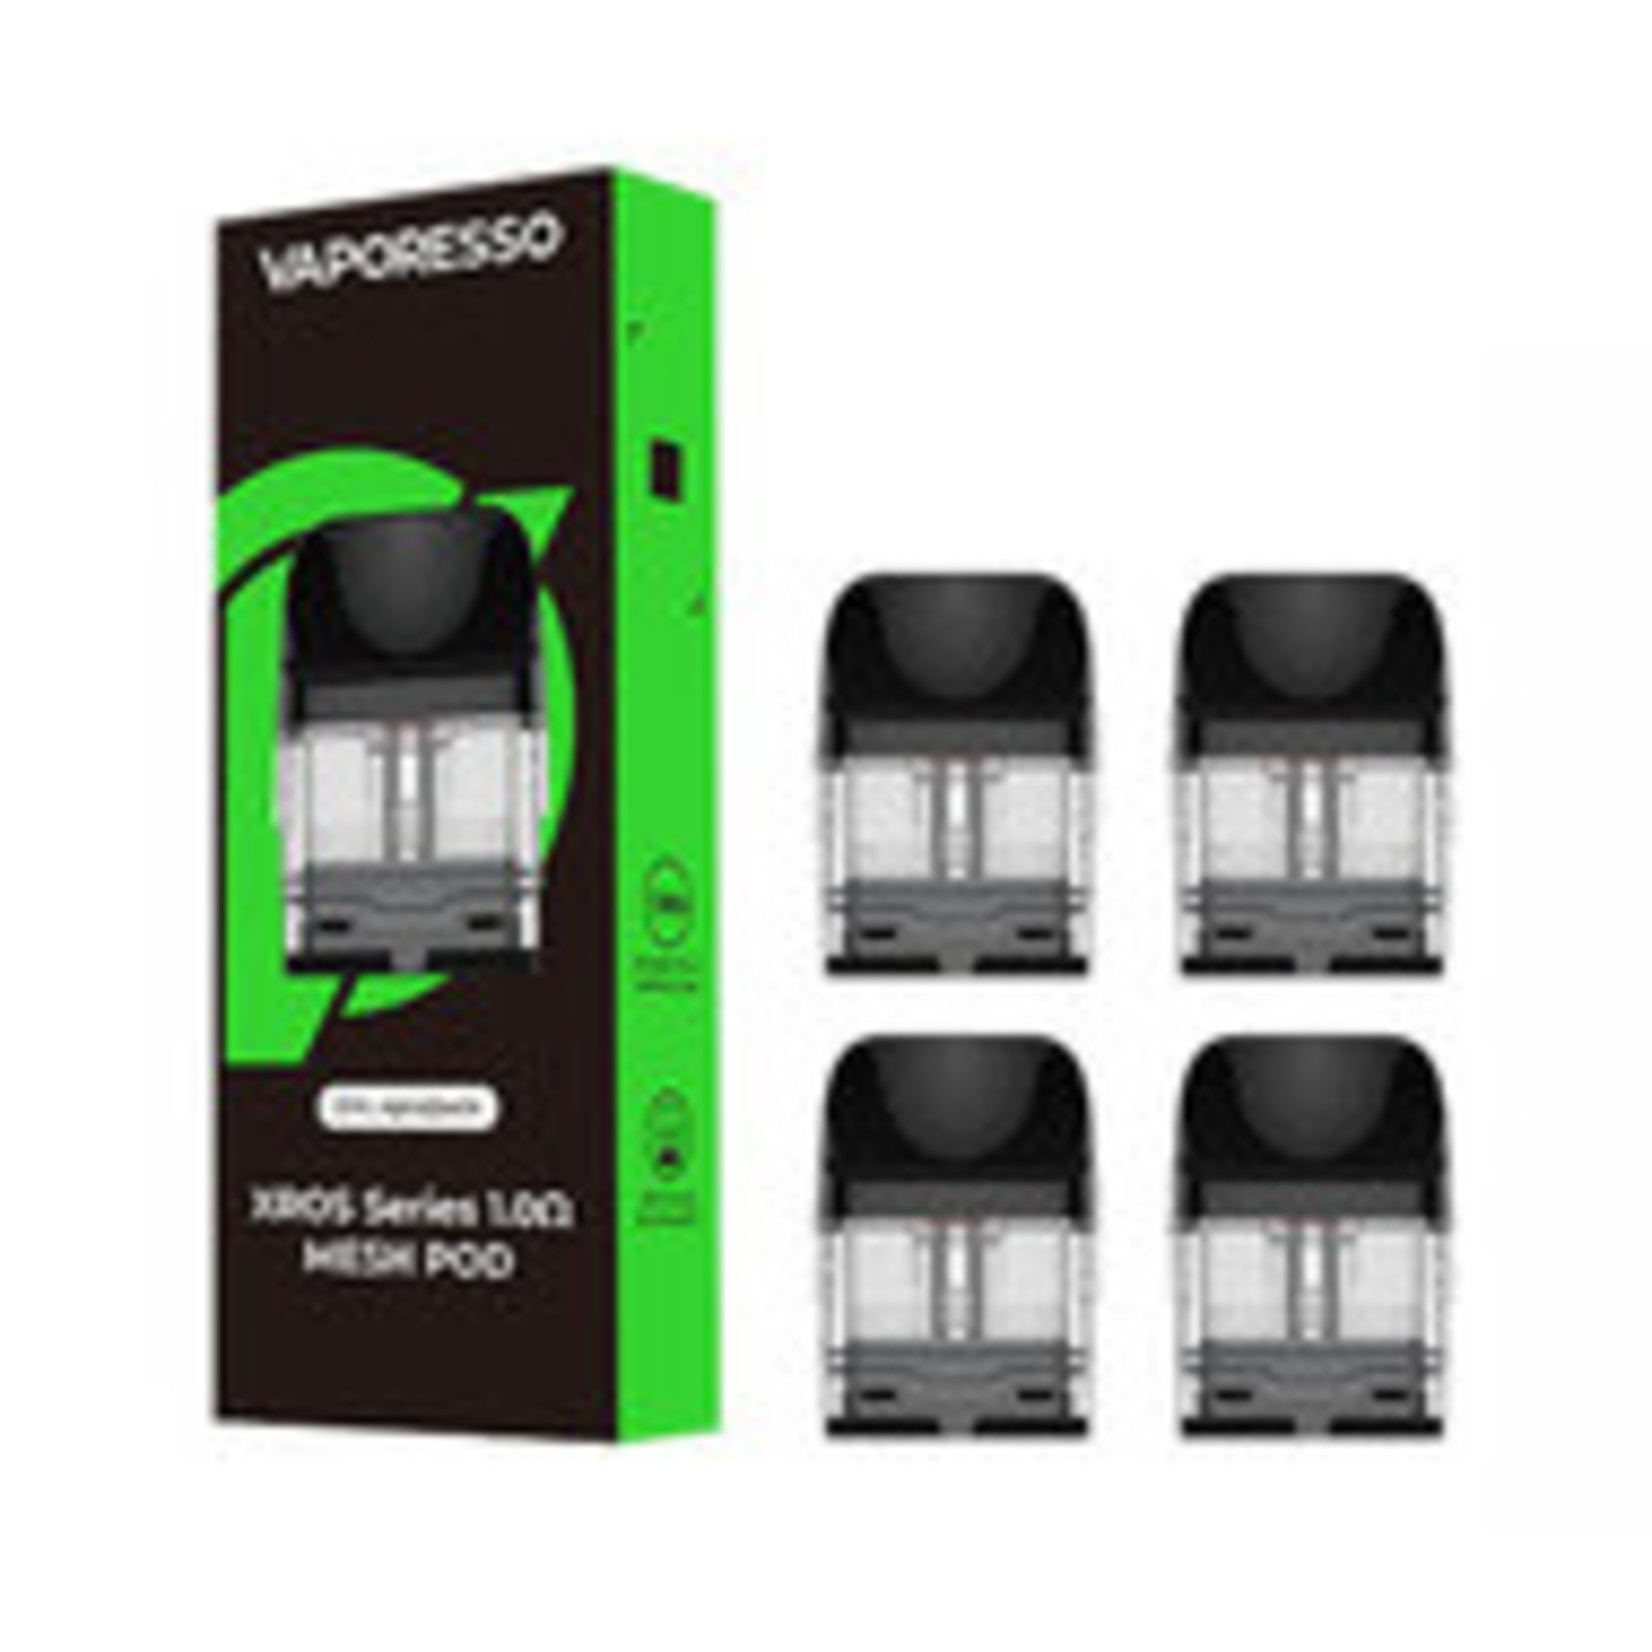 Vaporesso Vaporesso XROS 2ML Refillable Replacement Pods - Pack of 4